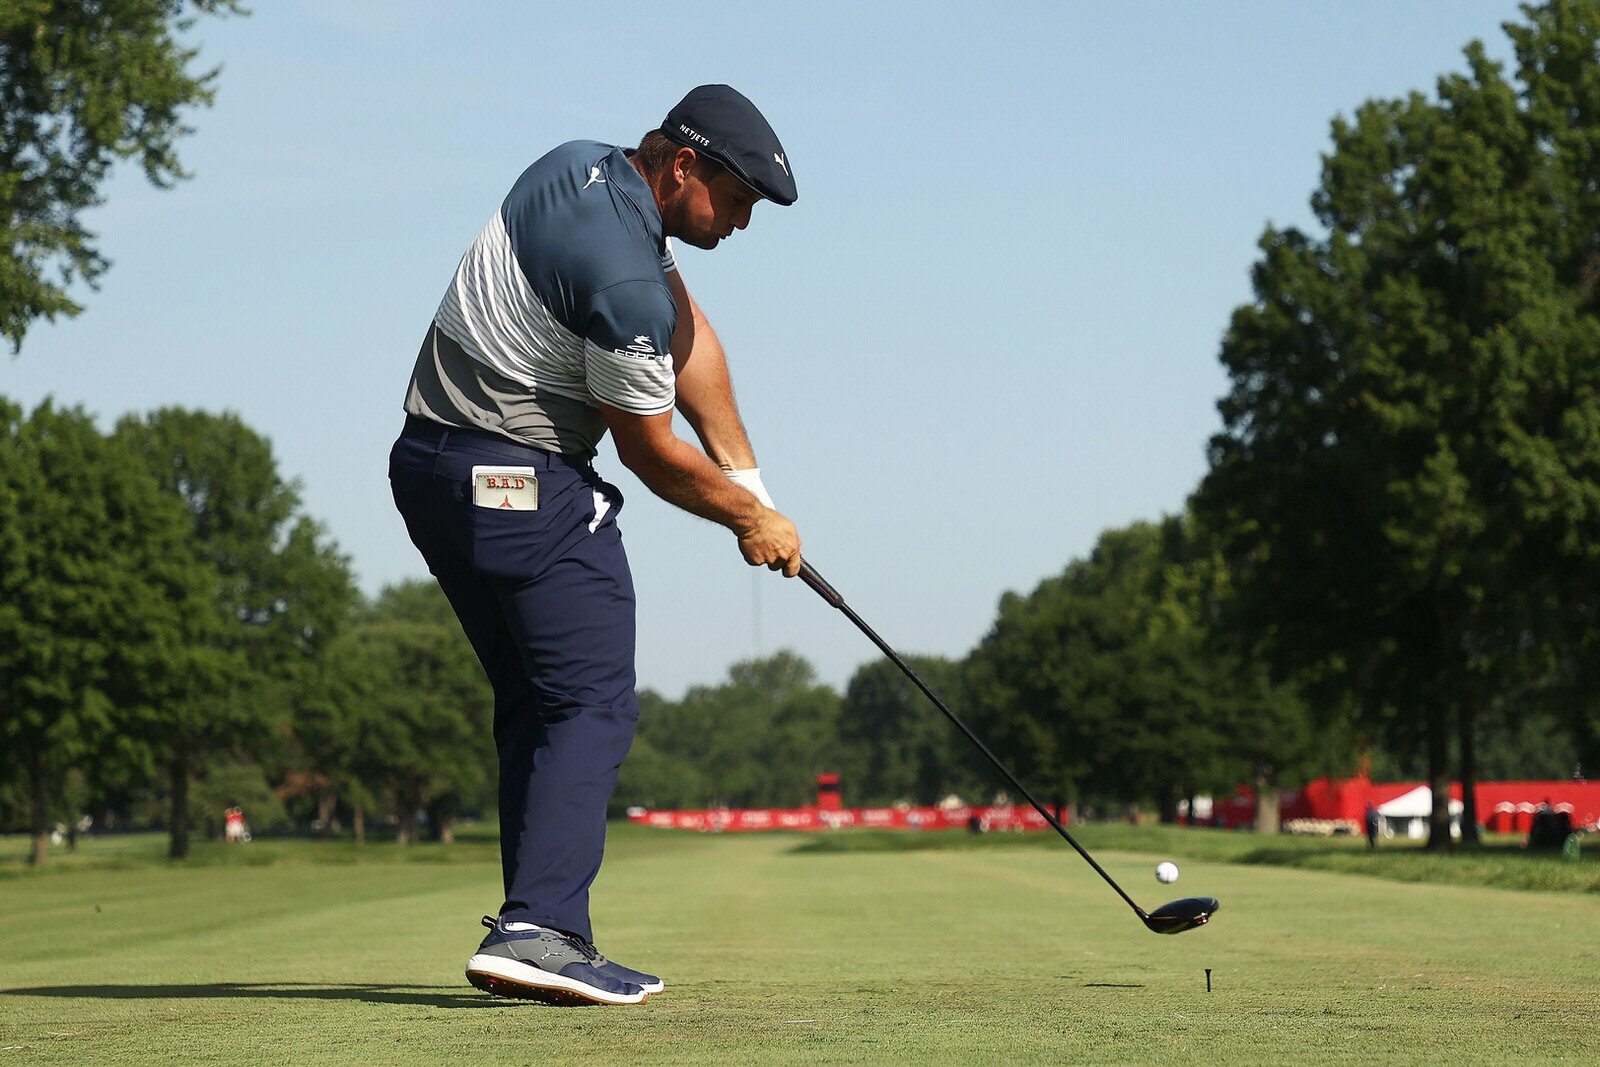  DETROIT, MICHIGAN - JULY 03: Bryson DeChambeau of the United States plays his shot from the 17th tee during the second round of the Rocket Mortgage Classic on July 03, 2020 at the Detroit Golf Club in Detroit, Michigan. (Photo by Gregory Shamus/Gett